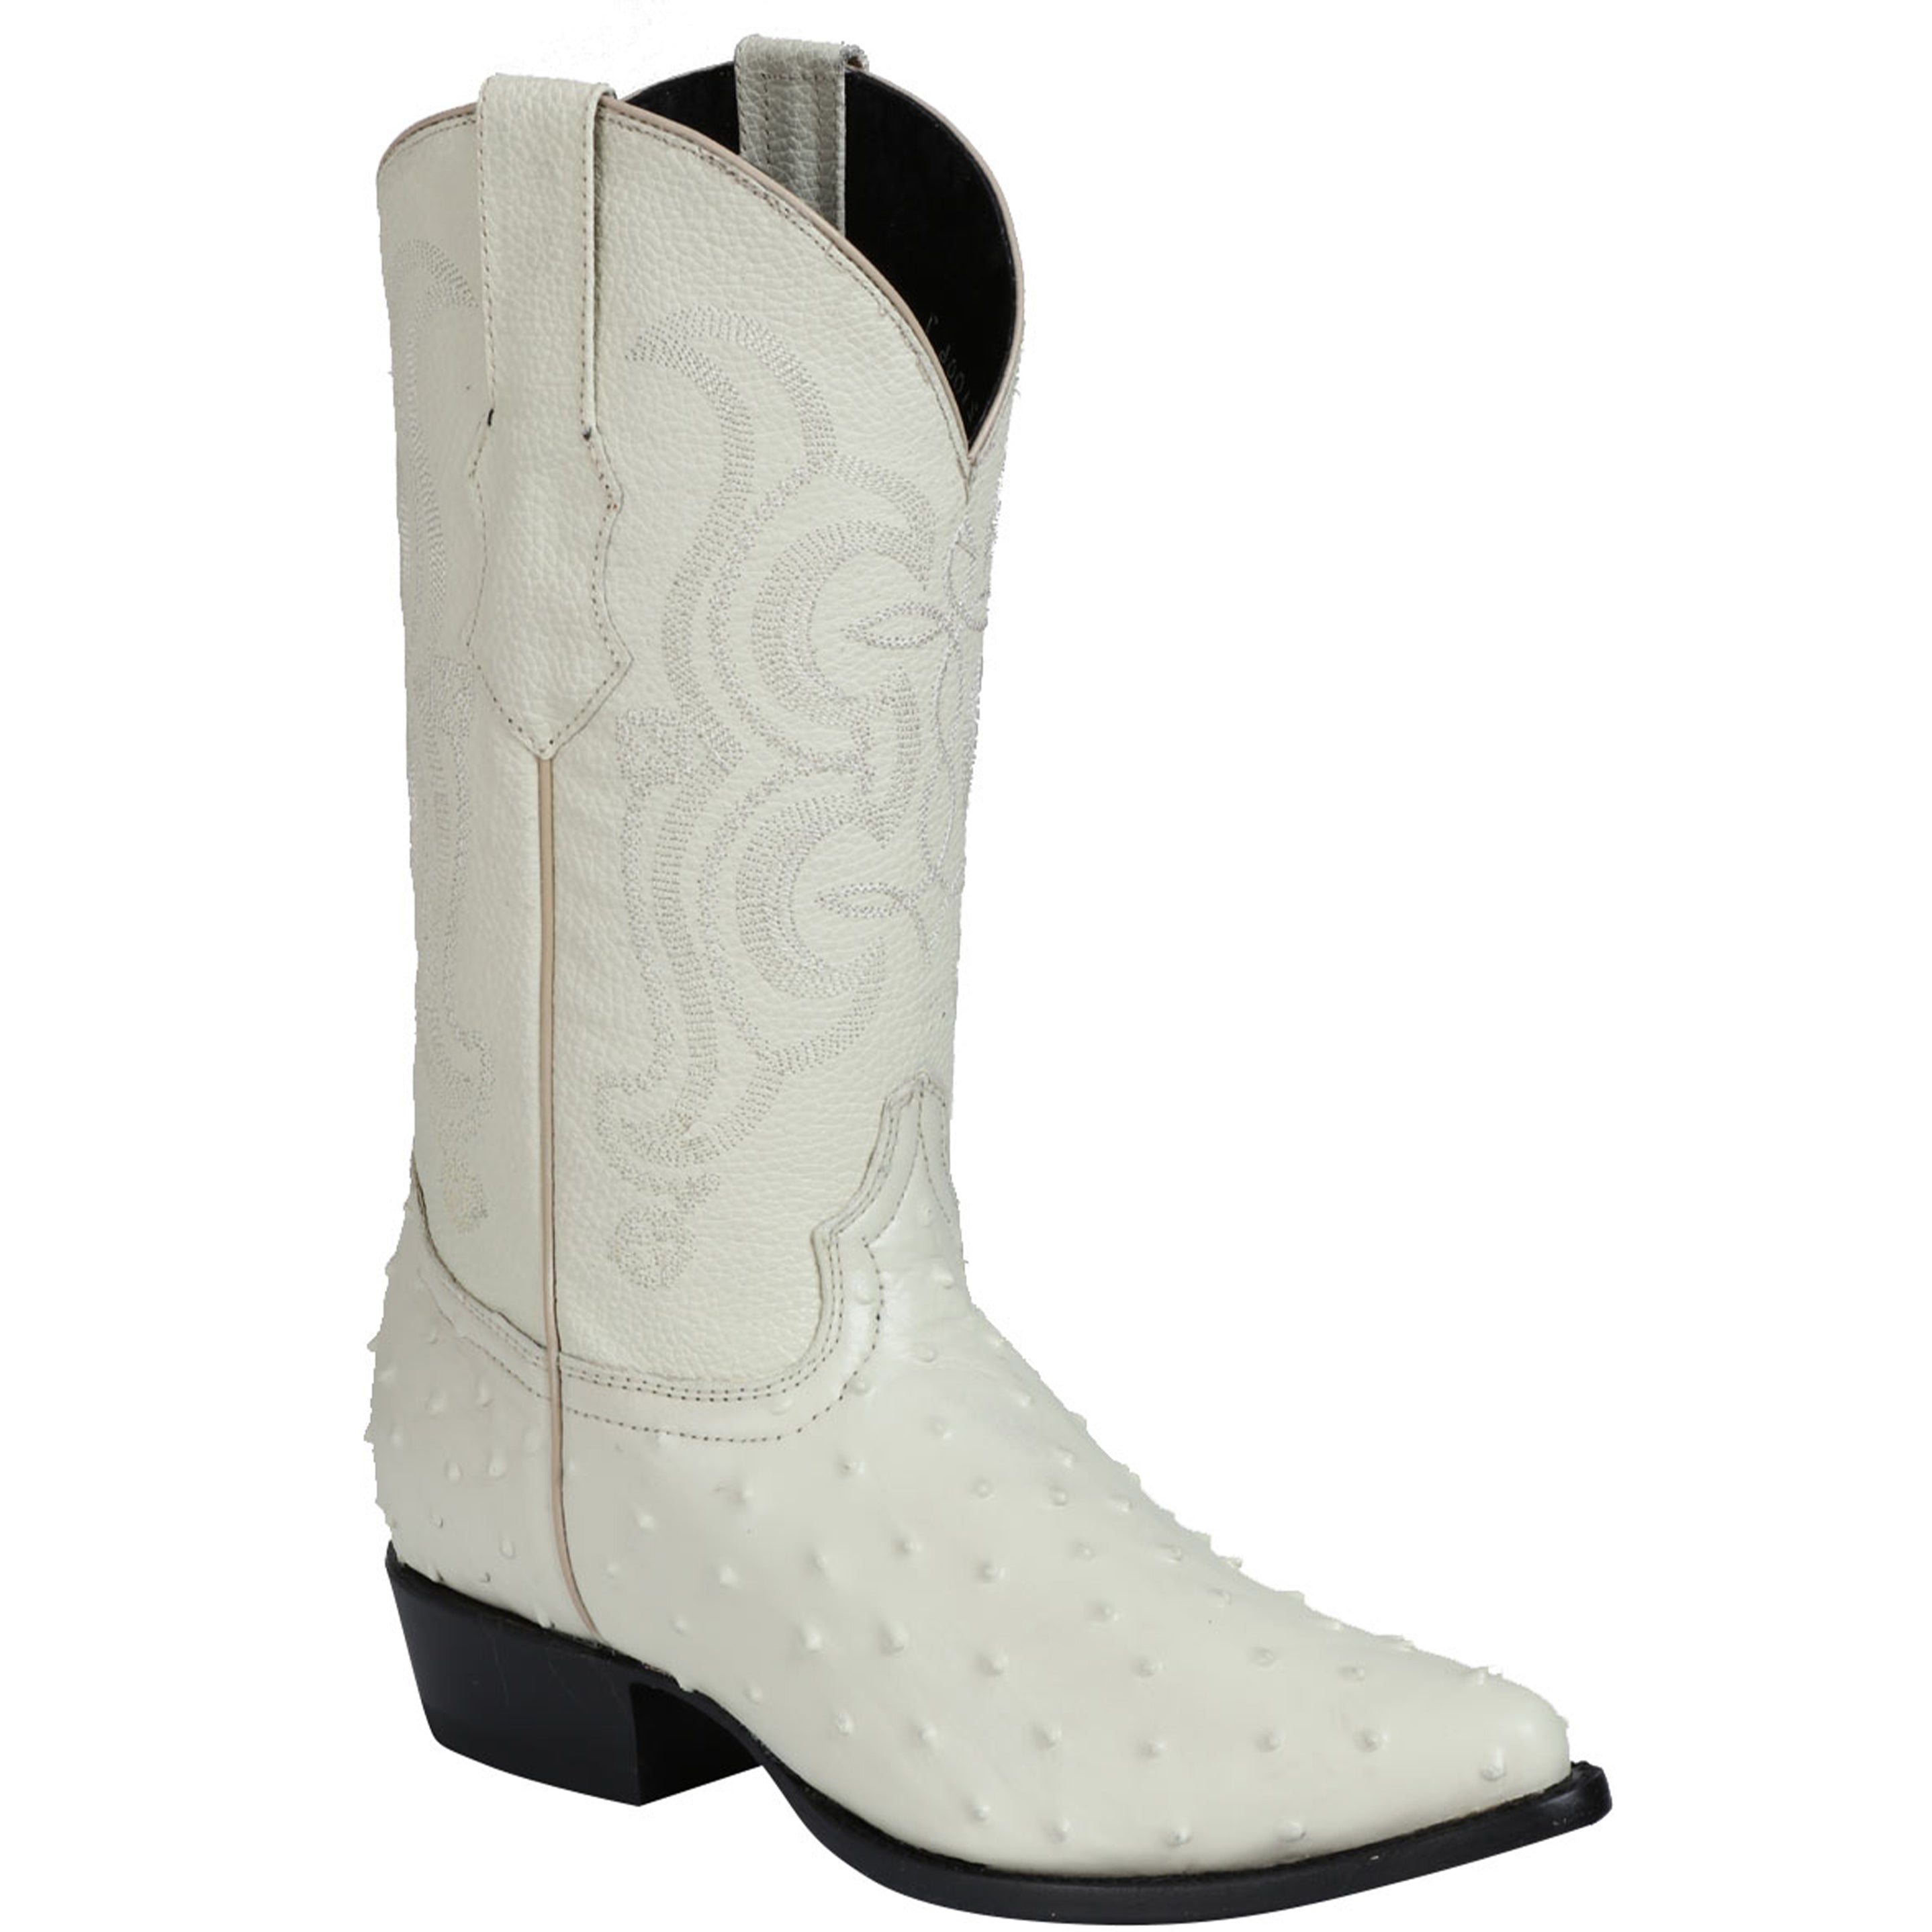 Bone White Ostrich Print Boots Pointed Toe - El General